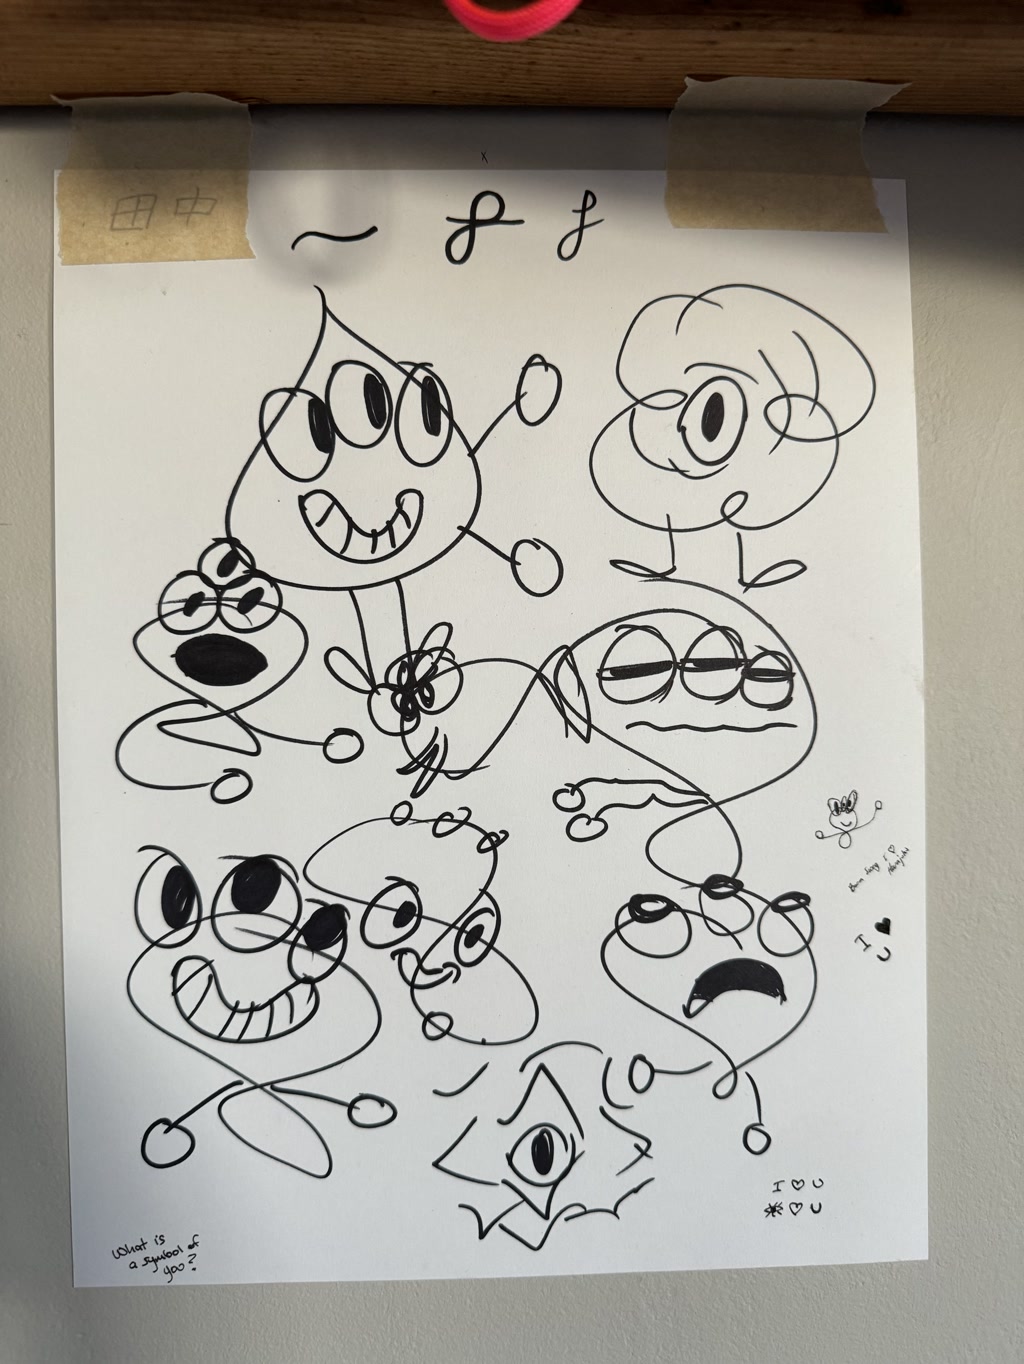 Various hand-drawn cartoon-like characters are sketched on a white paper. Each character uniquely expresses a range of emotions or states like happiness, surprise, and anger. They appear playful and whimsical, with exaggerated facial expressions. Some features are simplistic with large eyes and expressive mouths, while others have detailed aspects like eyeglasses or different hairstyles. The paper is casually taped to a surface at the top left and top right corners with what appears to be tan-colored tape.